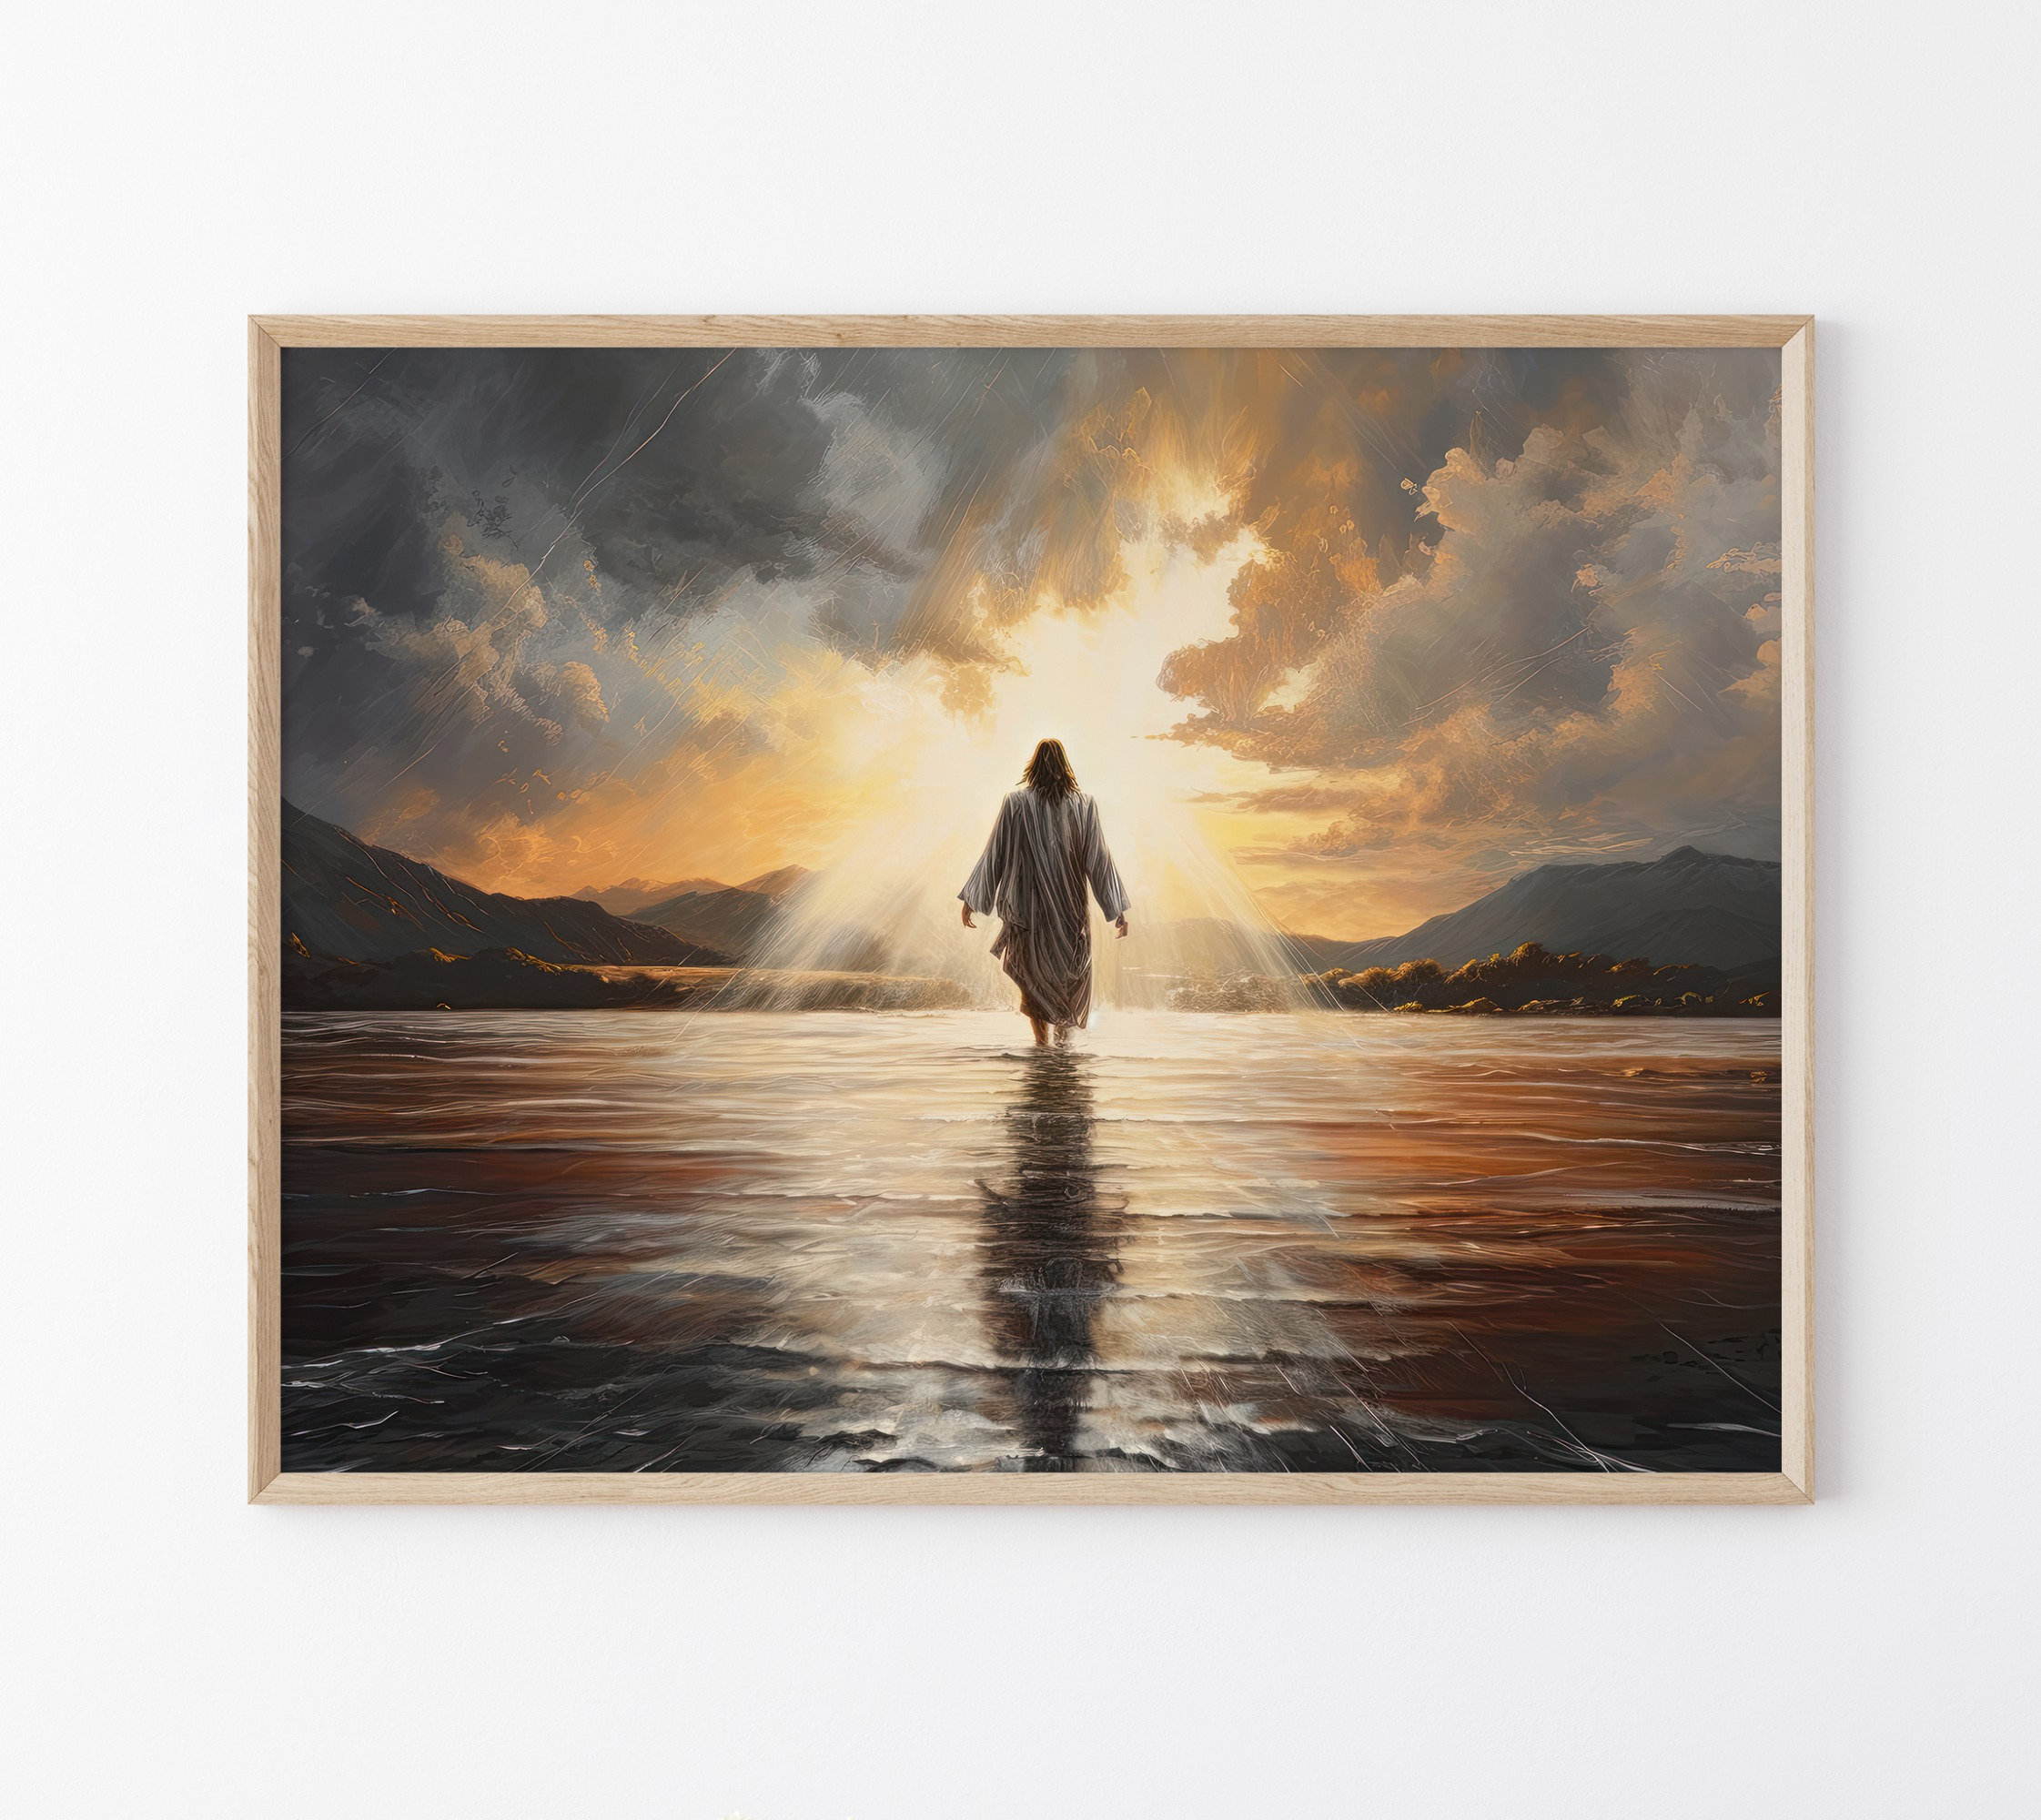 Water Christian Clouds Religious Art Matte Original Oil Wall Religious Print, Walking Etsy Christ Wall Holy Jesus Painting, Print Art, Decor, on -